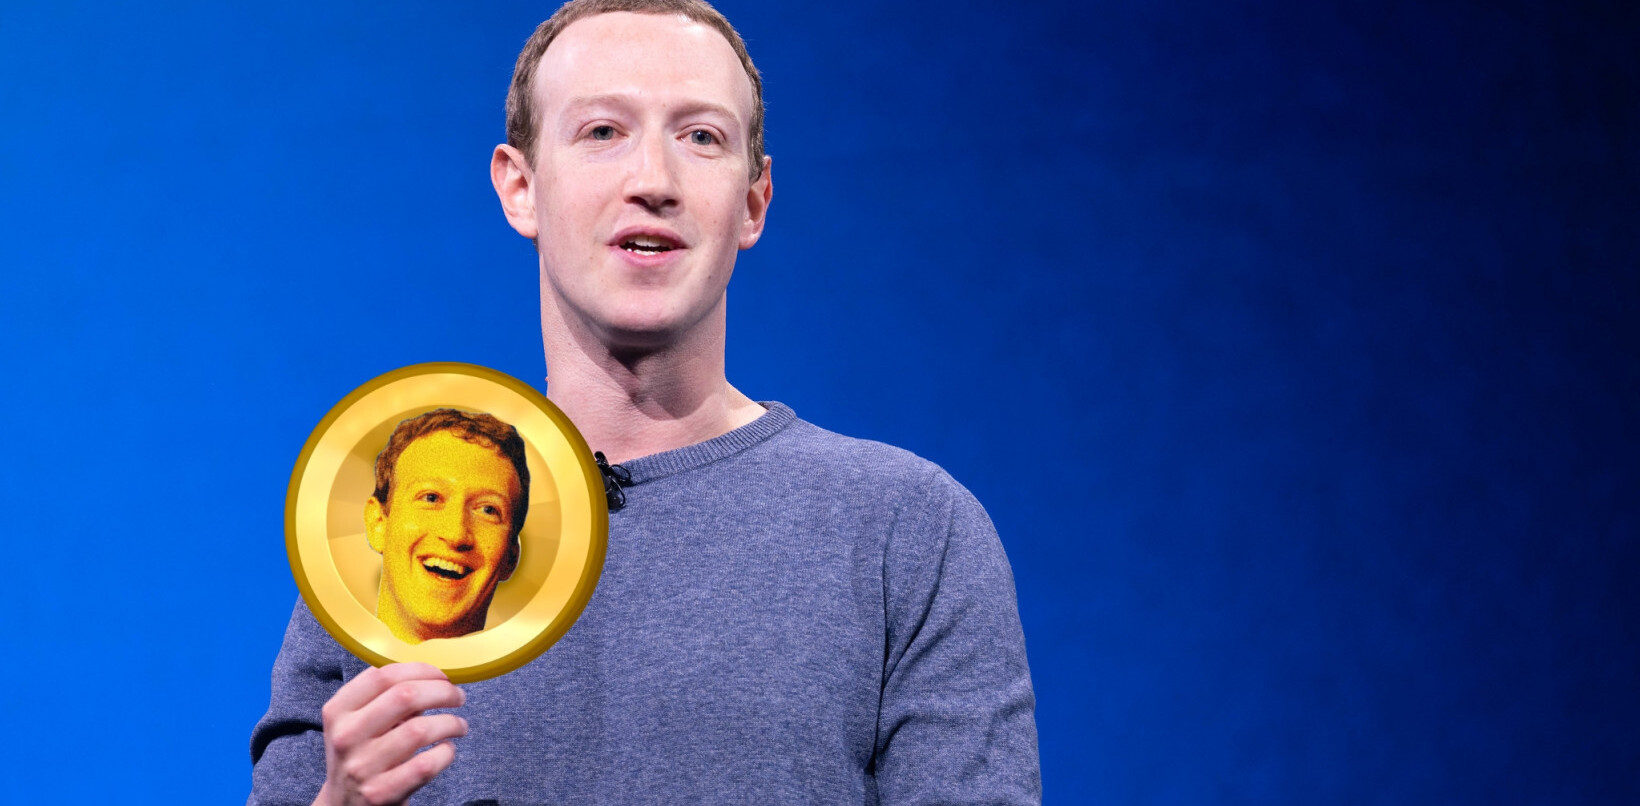 Sorry, no F8 this year — metamates are busy making ‘Zuck Bucks’